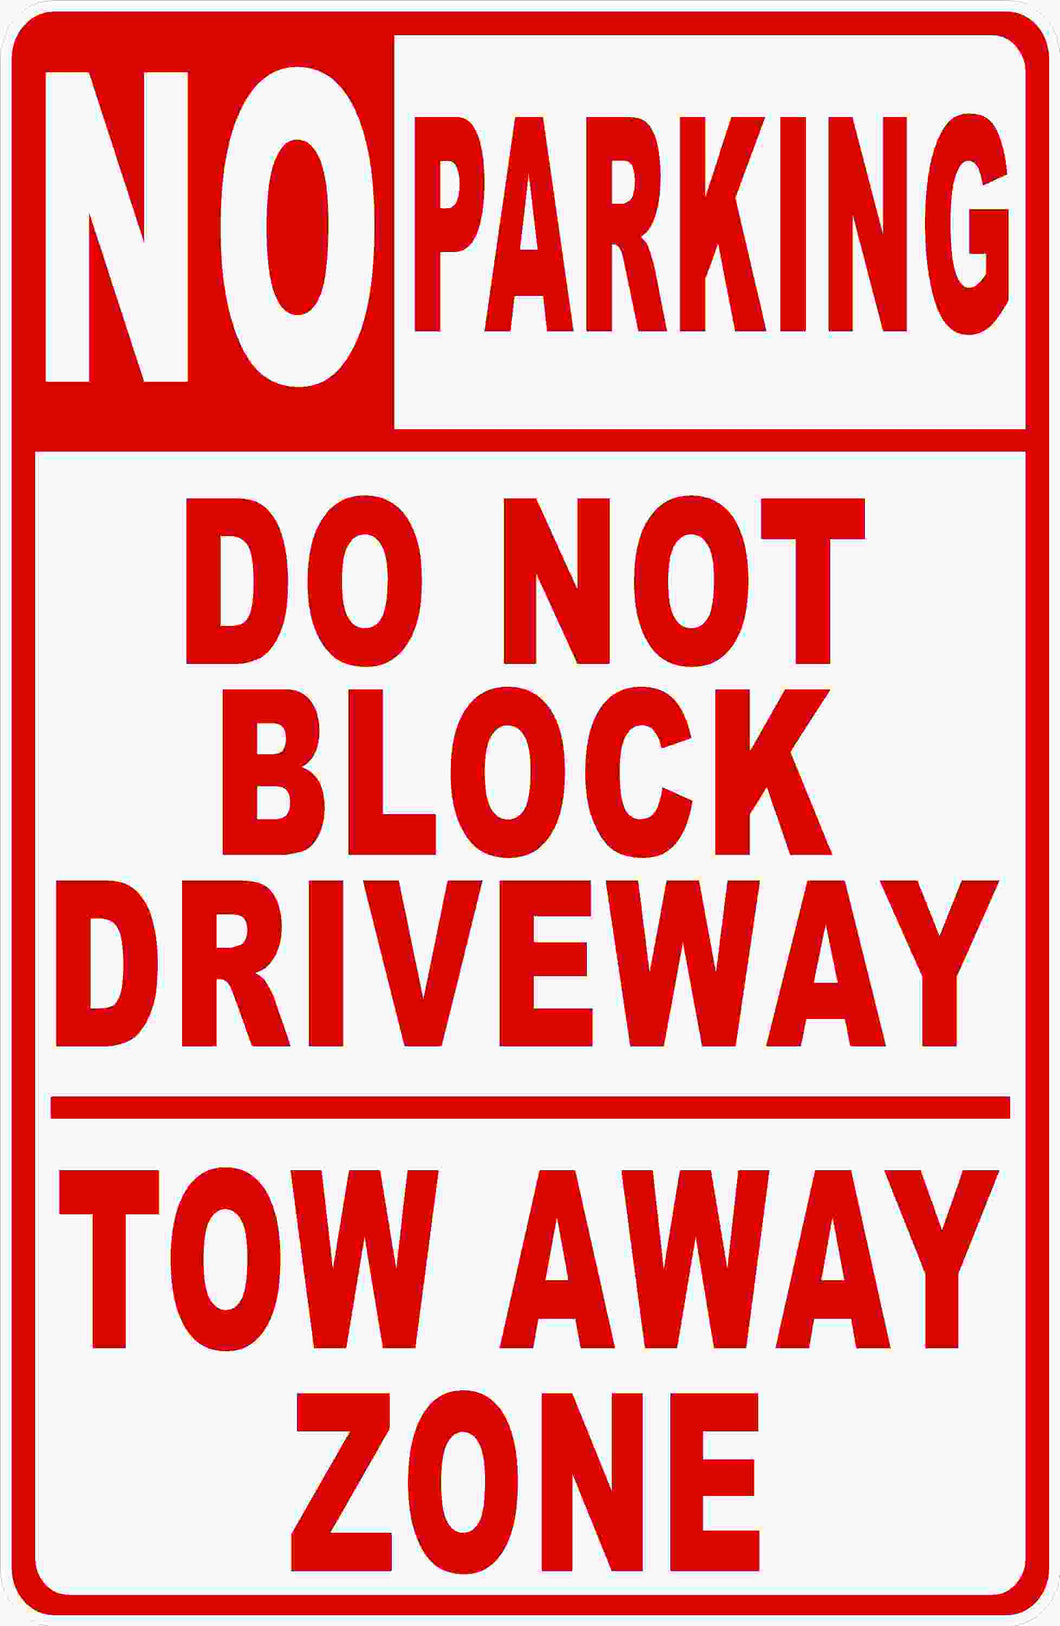 no-parking-do-not-block-driveway-tow-away-zone-sign-signs-by-salagraphics